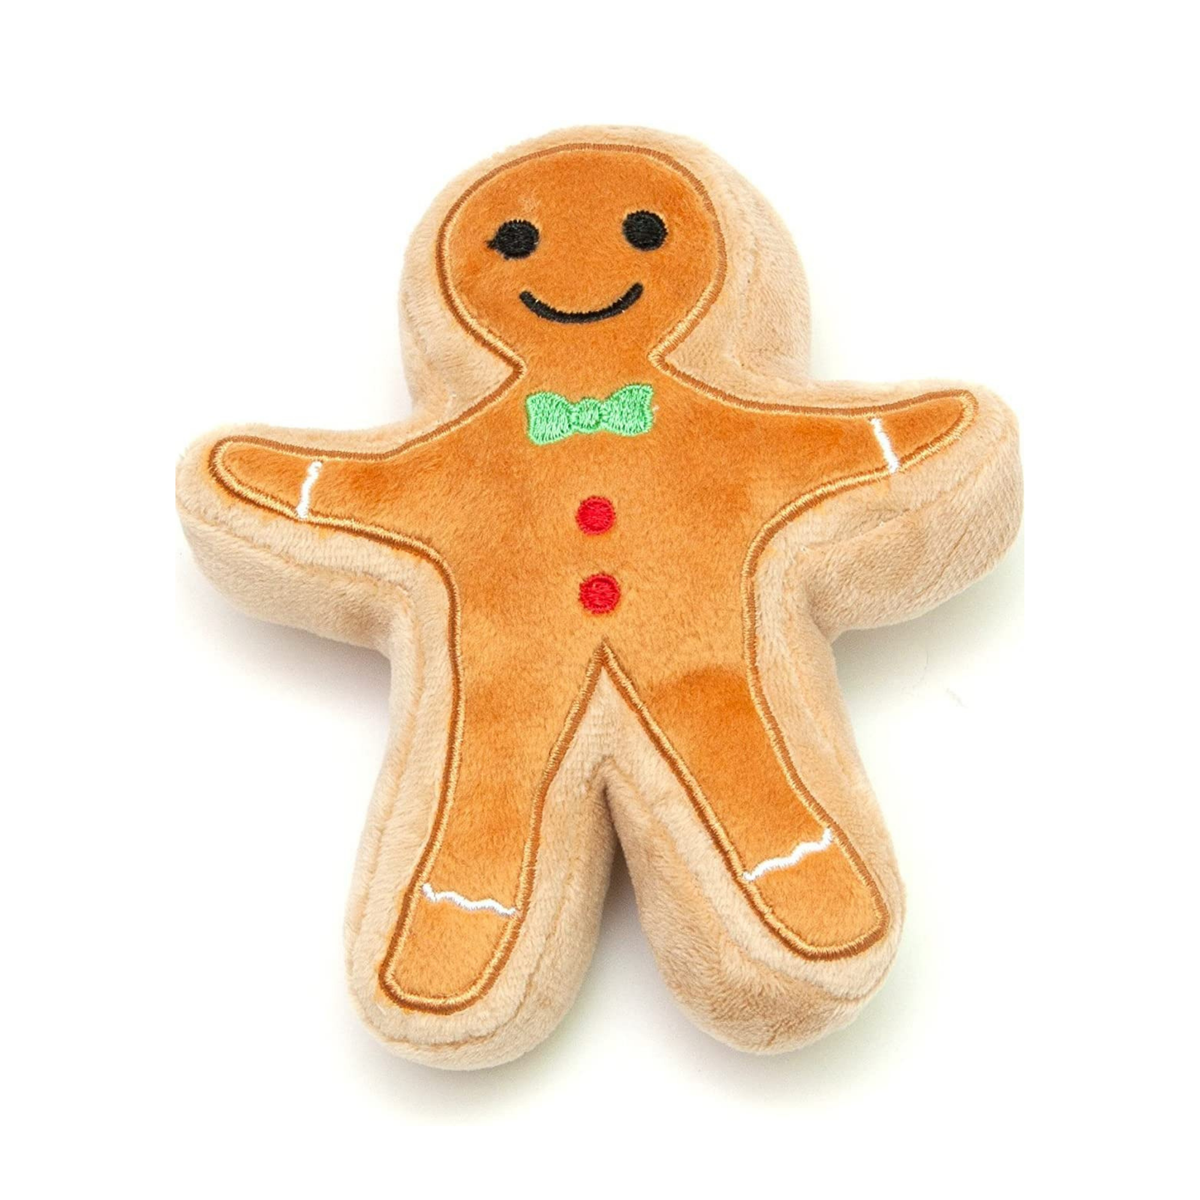 Midlee Christmas Sugar Cookie Plush Dog Toy (Gingerbread)